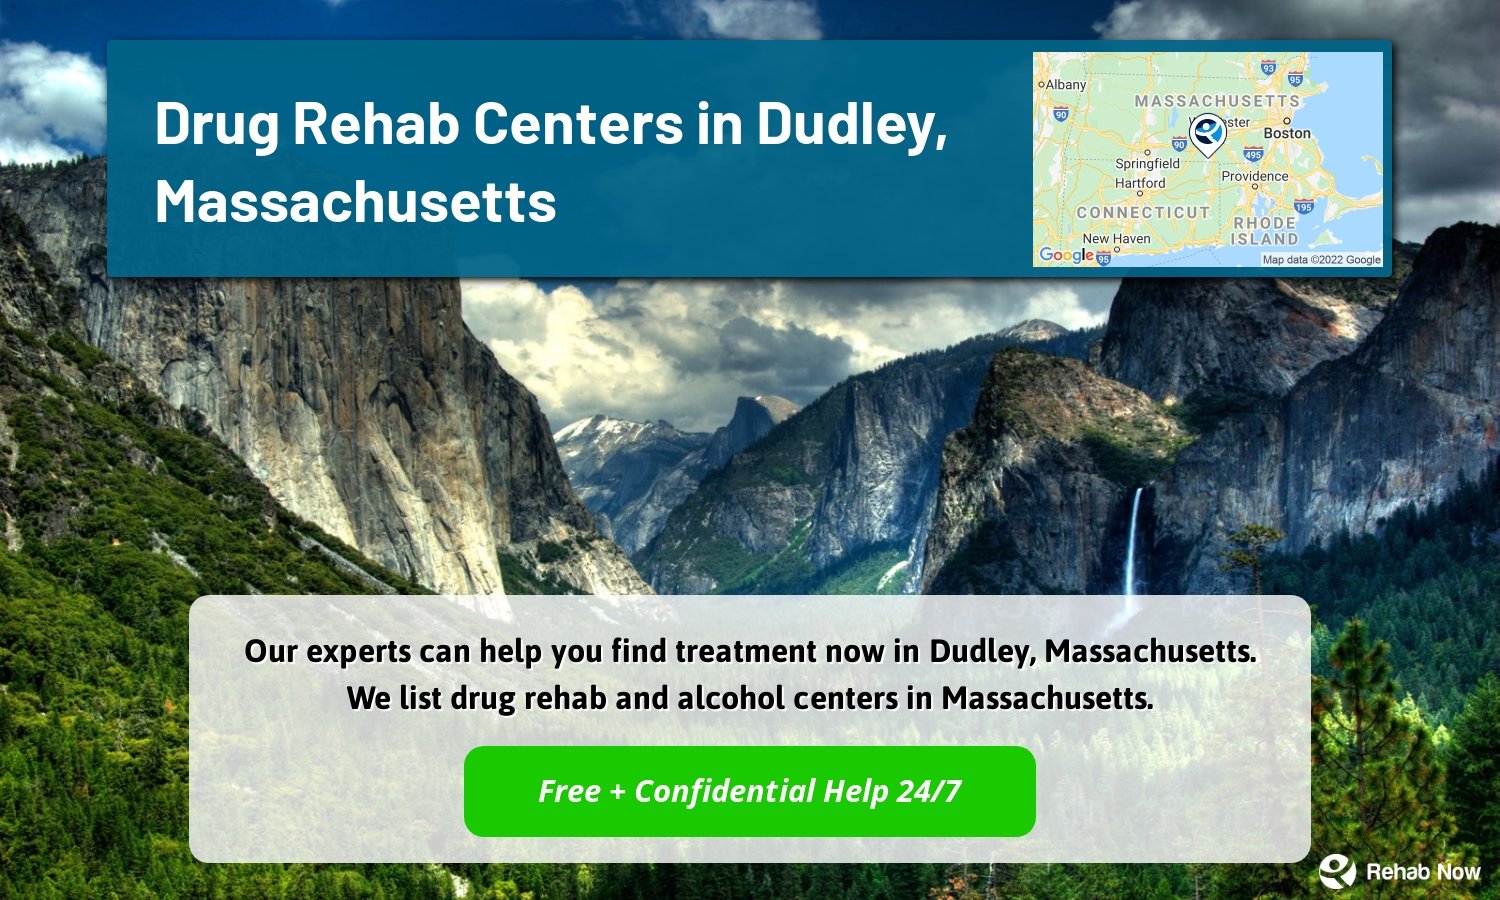 Our experts can help you find treatment now in Dudley, Massachusetts. We list drug rehab and alcohol centers in Massachusetts.